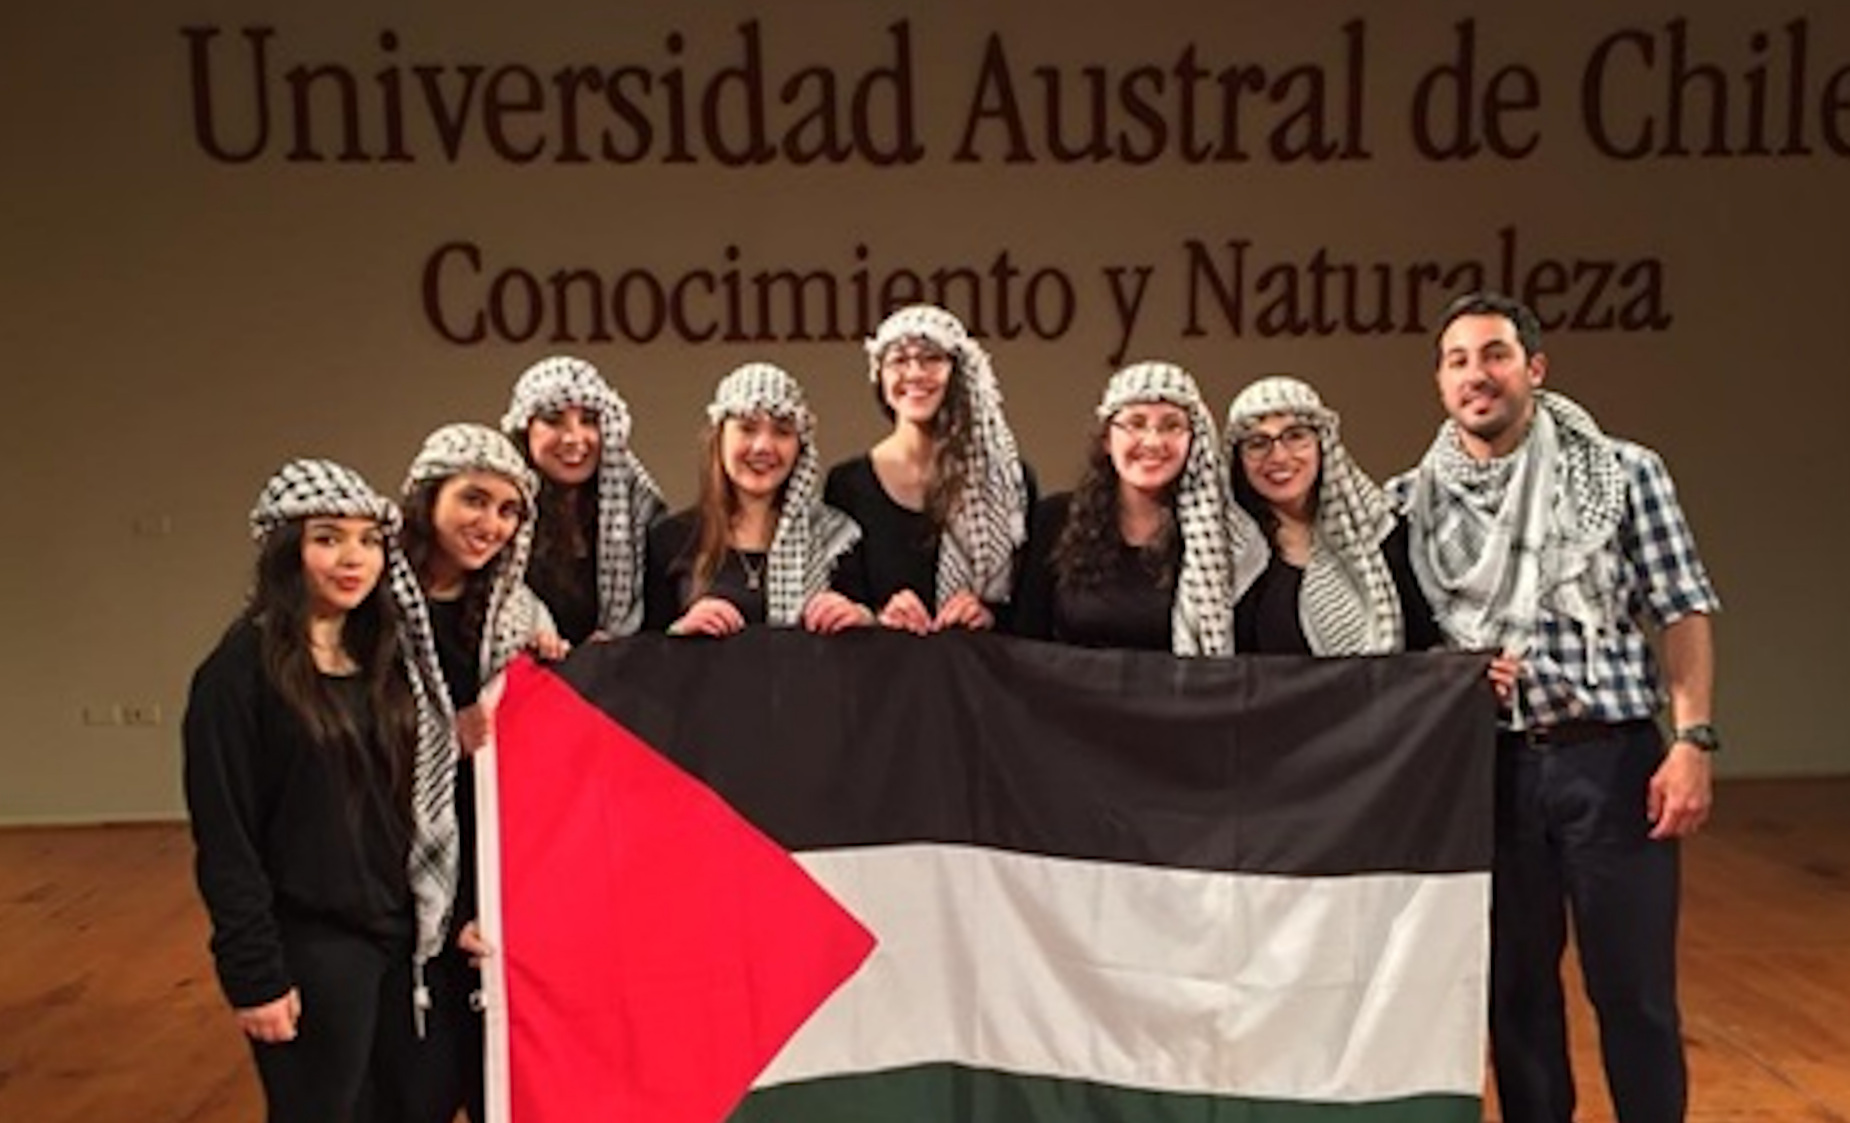 Student Federation of the Austral University of Chile (FEUACh) declares itself an Israeli Apartheid Free Zone